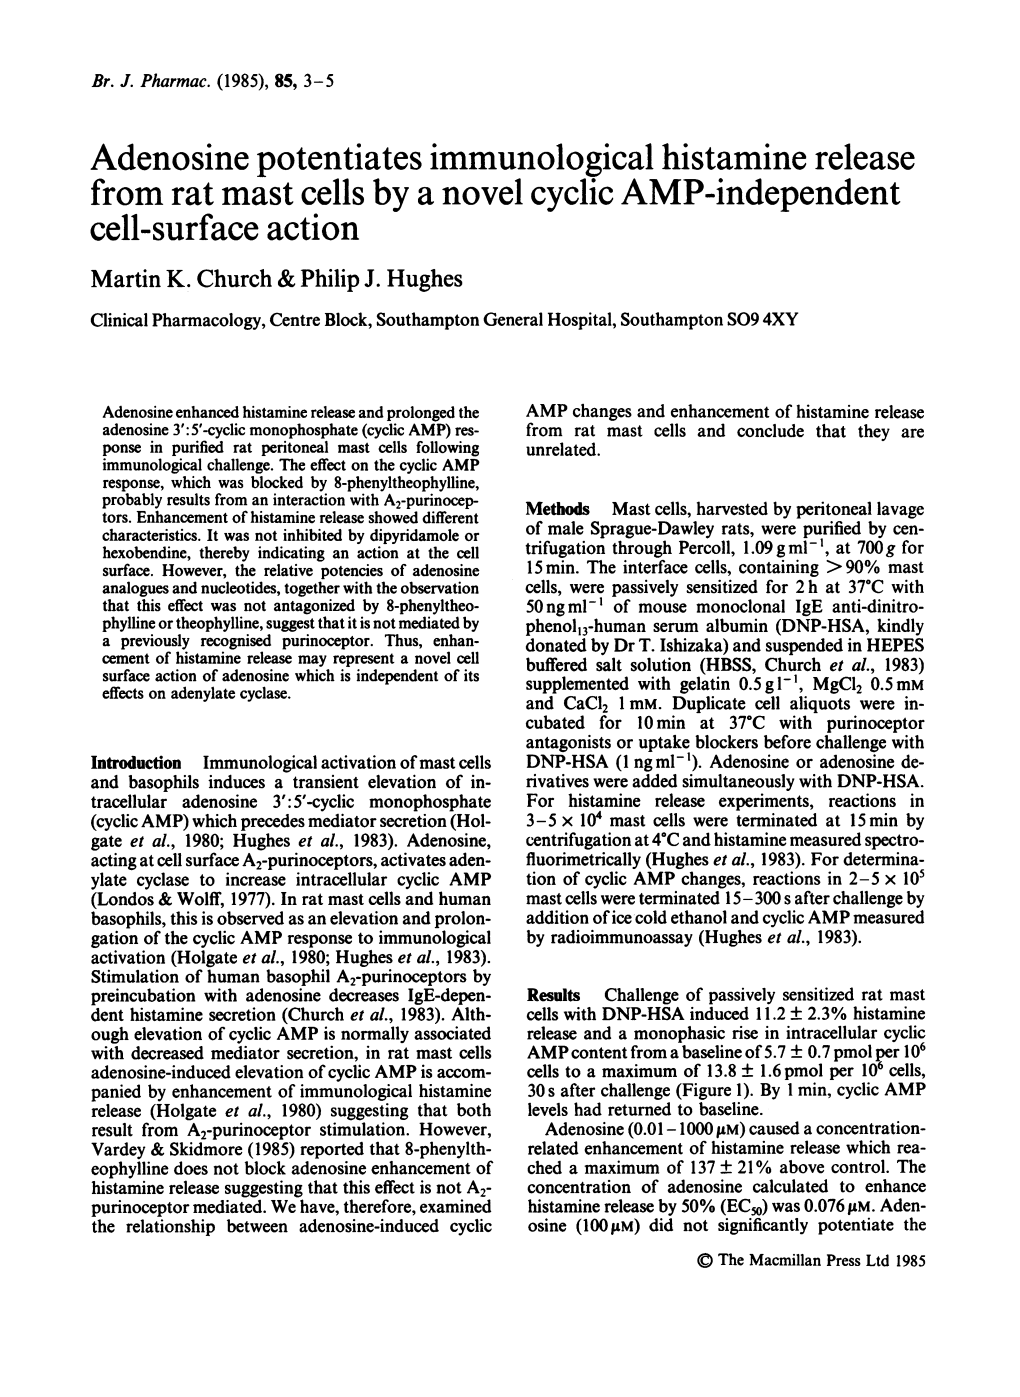 Adenosine Potentiates Immunological Histamine Release from Rat Mast Cells by a Novel Cyclic AMP-Independent Cell-Surface Action Martin K